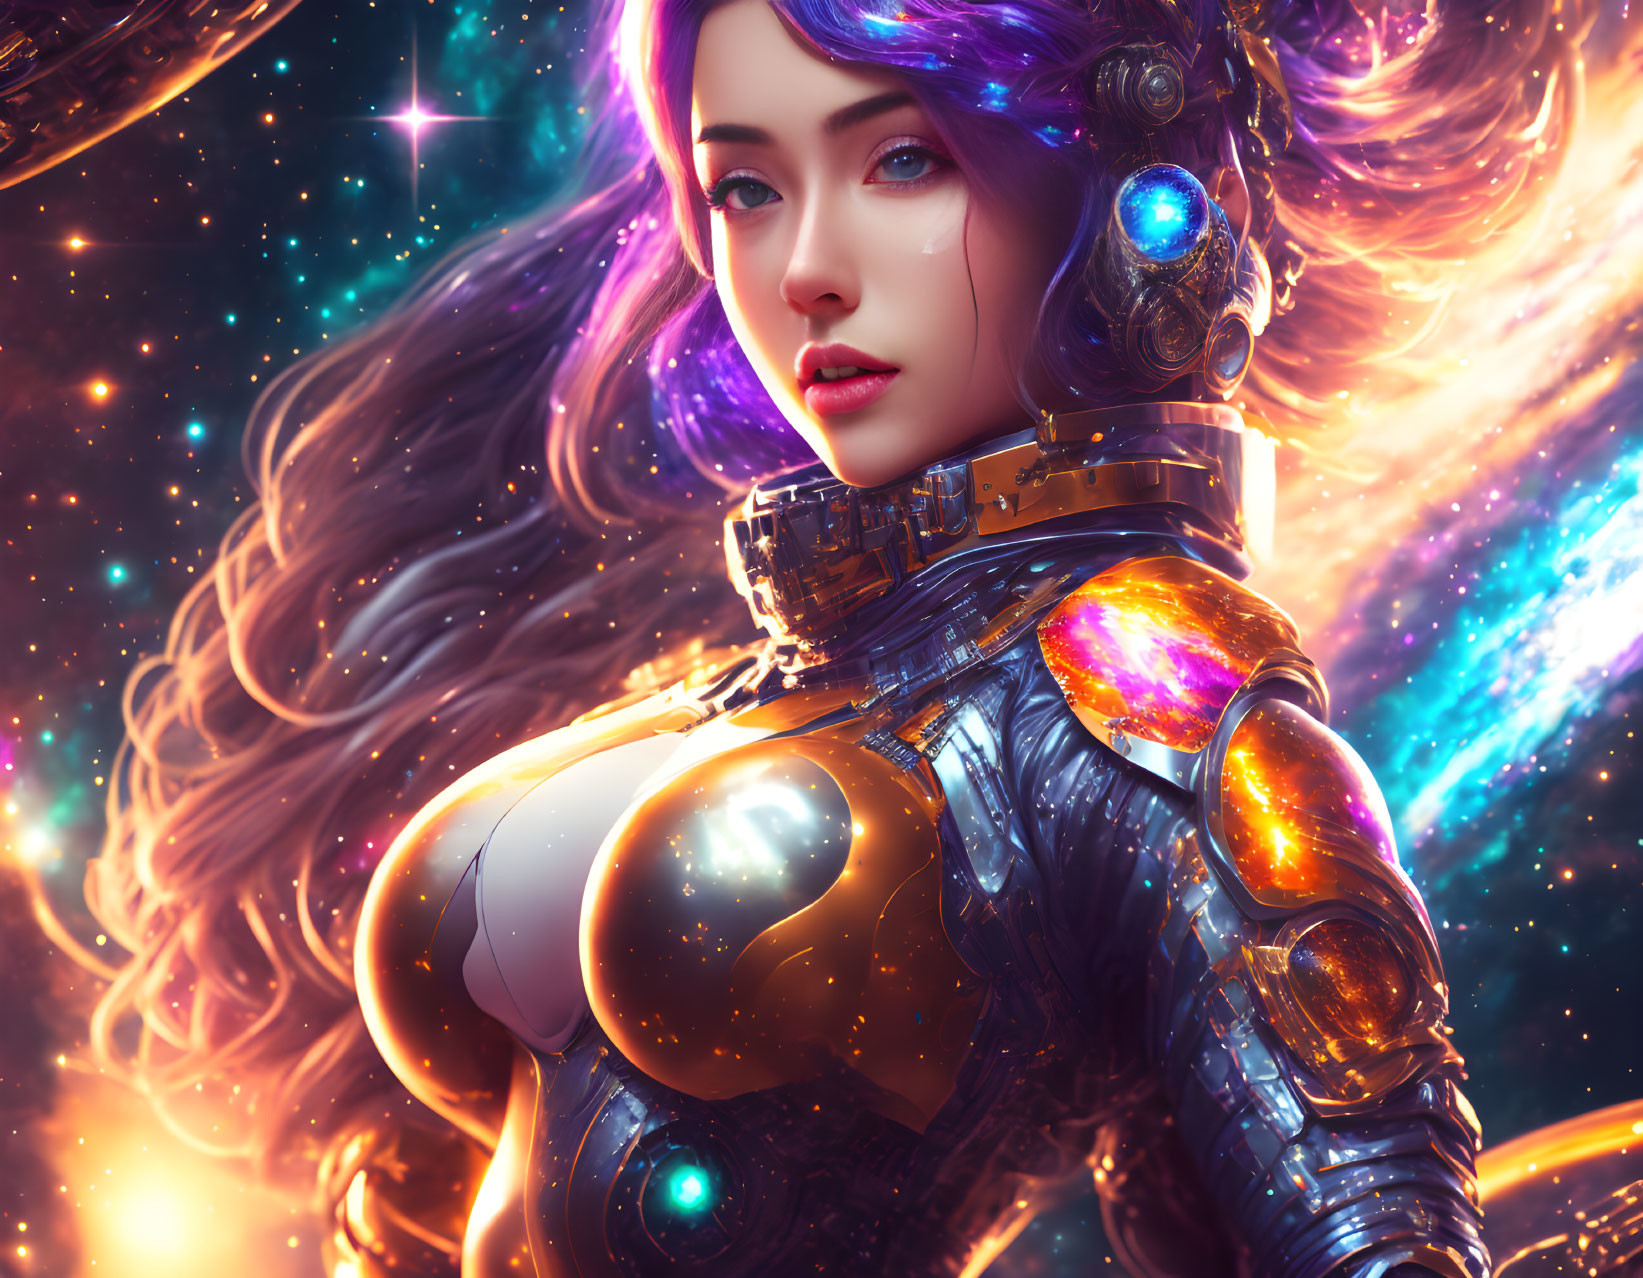 Purple-haired woman in futuristic armor on vibrant cosmic backdrop